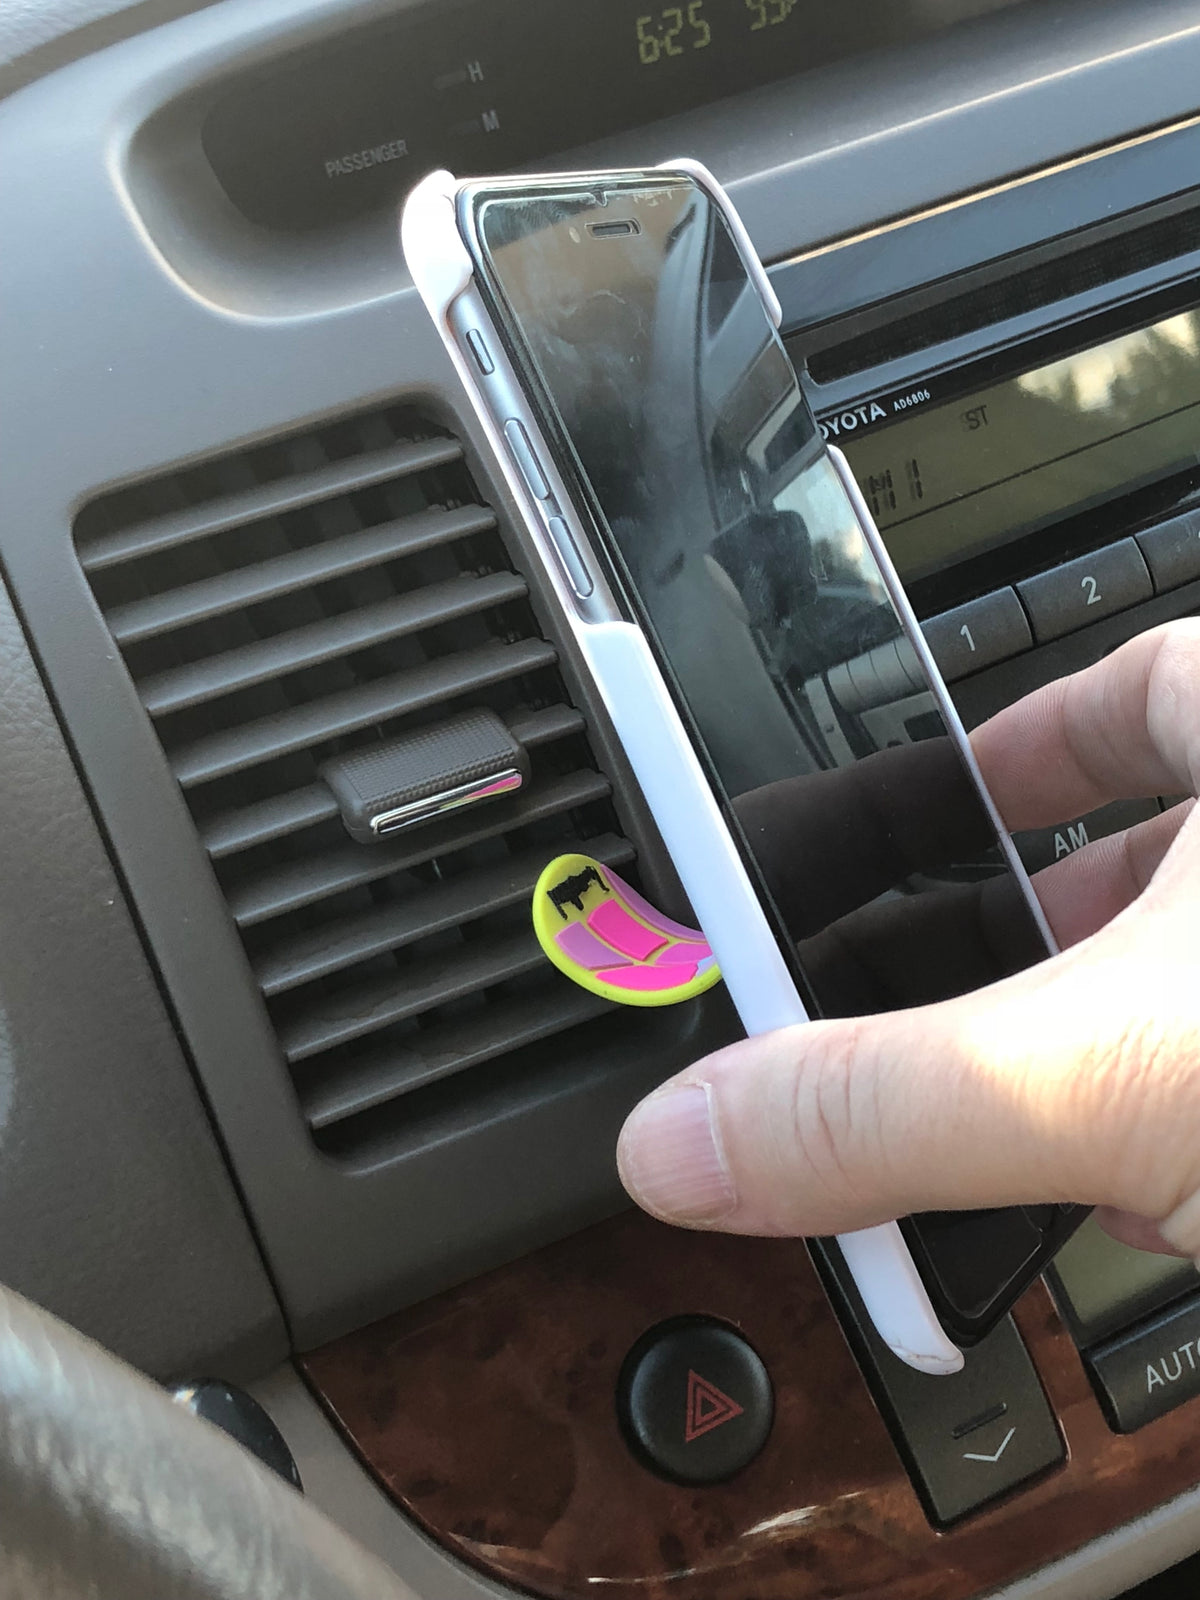 TongueStand &quot;TongueSter&quot; {phone-stand. grip. car phone holder}